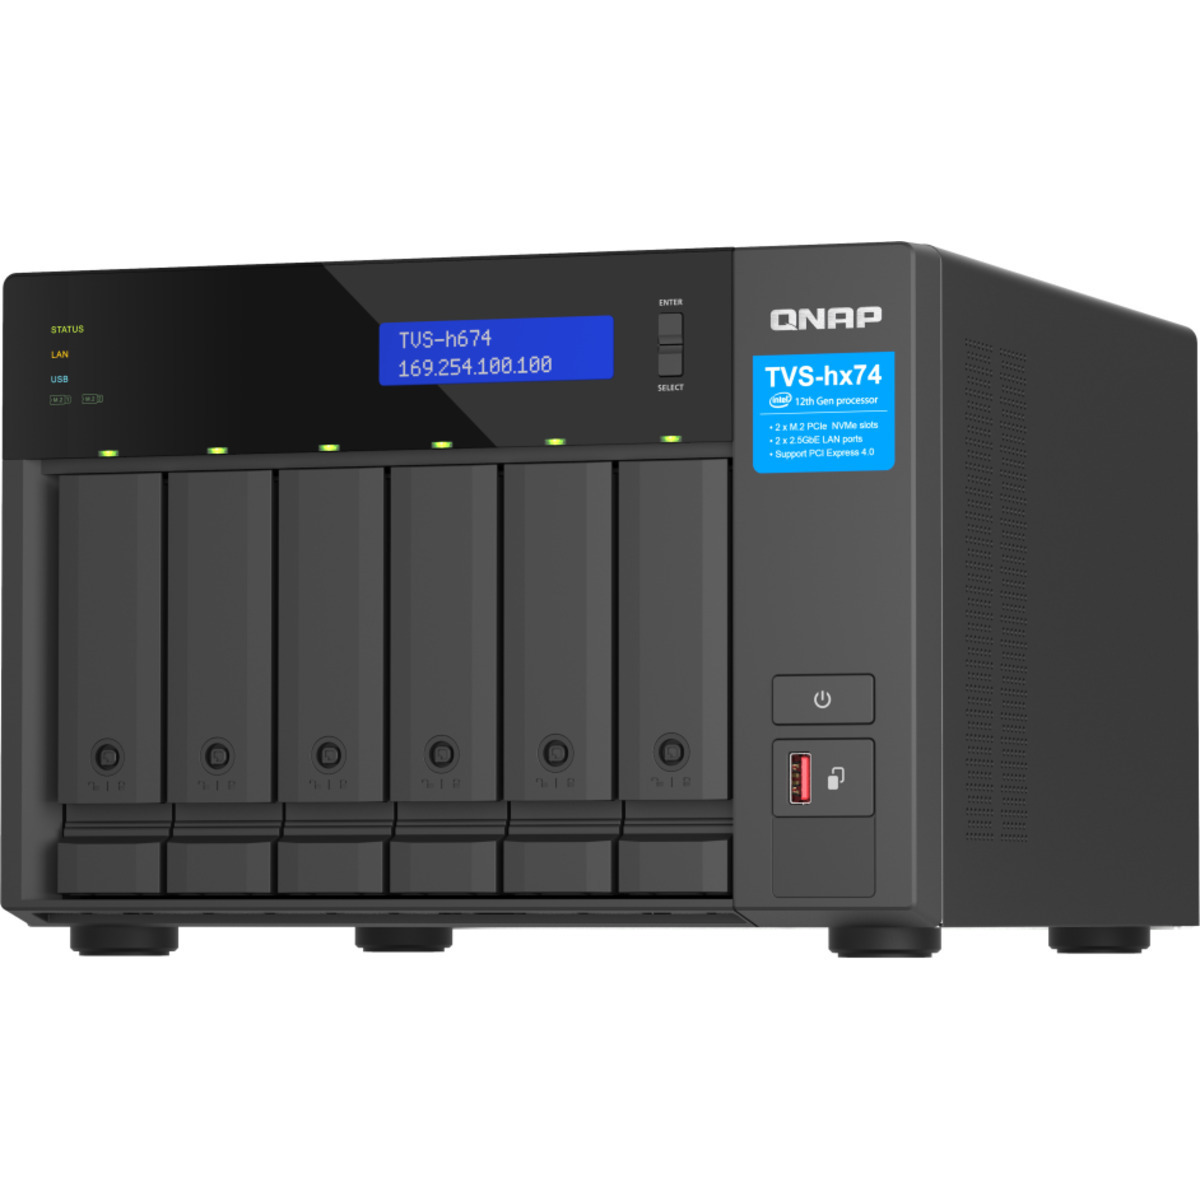 buy QNAP TVS-h674 Core i5 24tb Desktop NAS - Network Attached Storage Device 6x4000gb Samsung 870 EVO MZ-77E4T0BAM 2.5 560/530MB/s SATA 6Gb/s SSD CONSUMER Class Drives Installed - Burn-In Tested - nas headquarters buy network attached storage server device das new raid-5 free shipping usa spring sale TVS-h674 Core i5